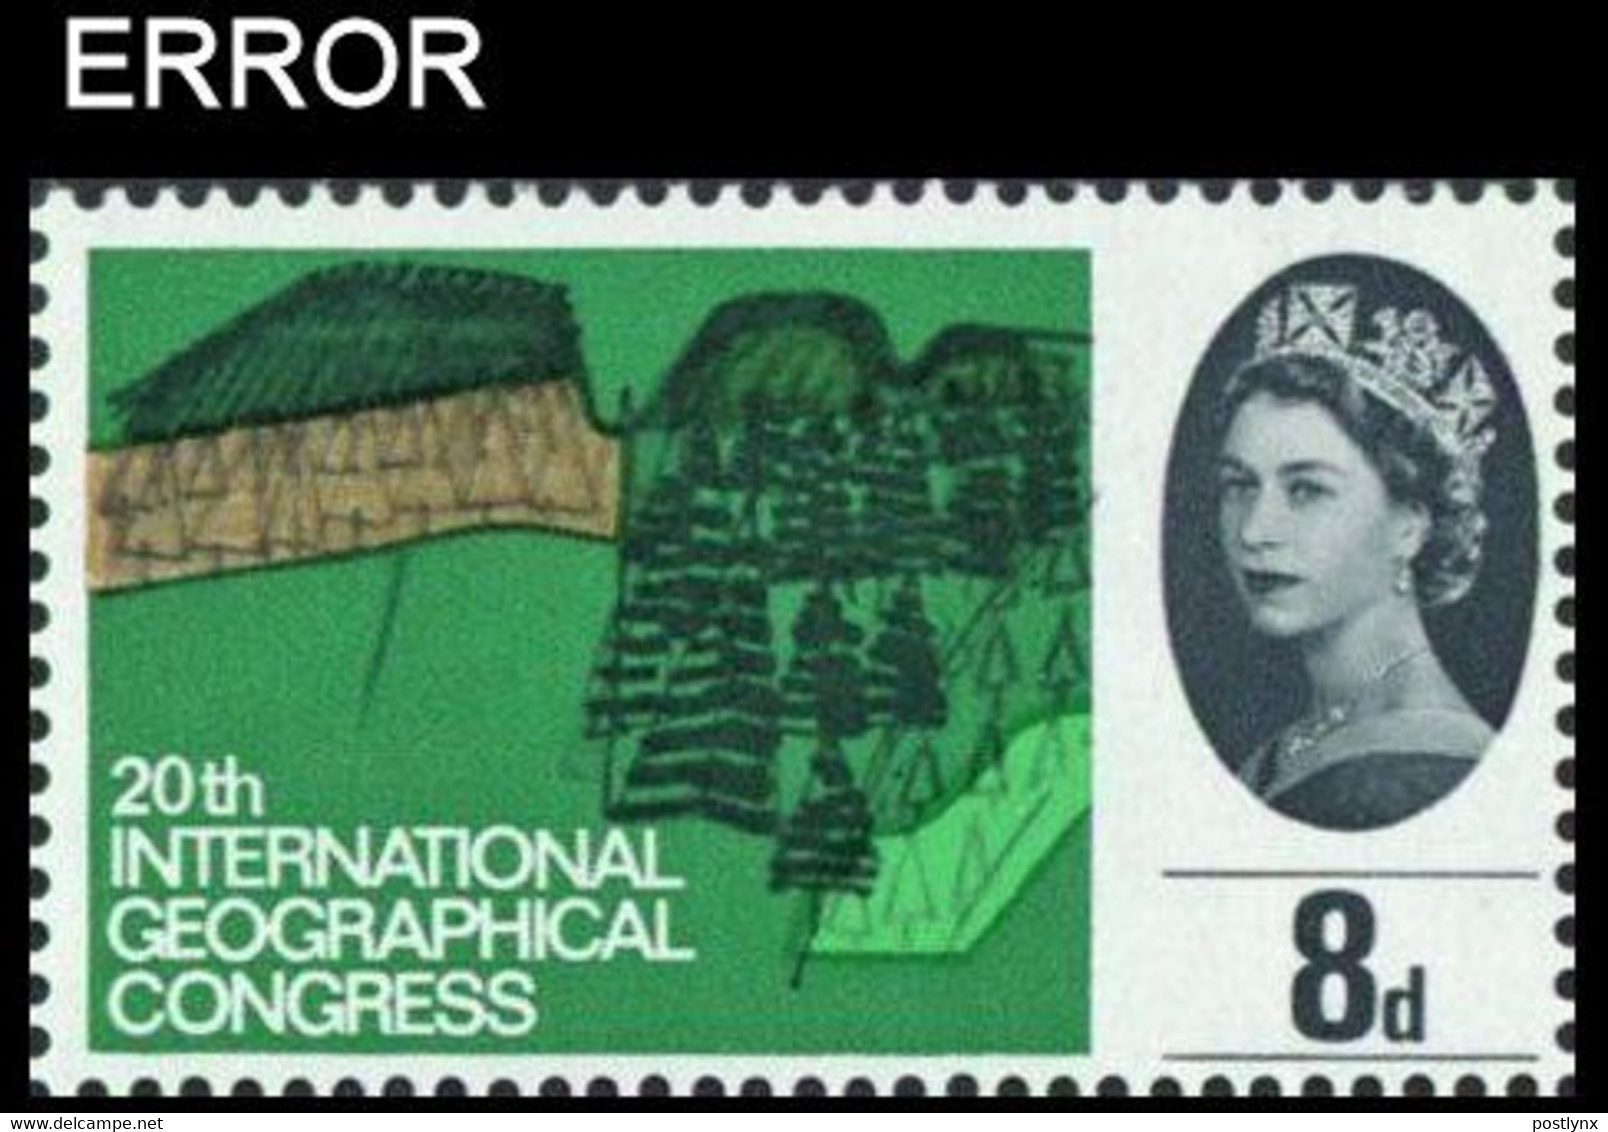 GREAT BRITAIN 1964 IGC Trees 8d ERROR:lawn Bright Green Geography - Errors, Freaks & Oddities (EFOs